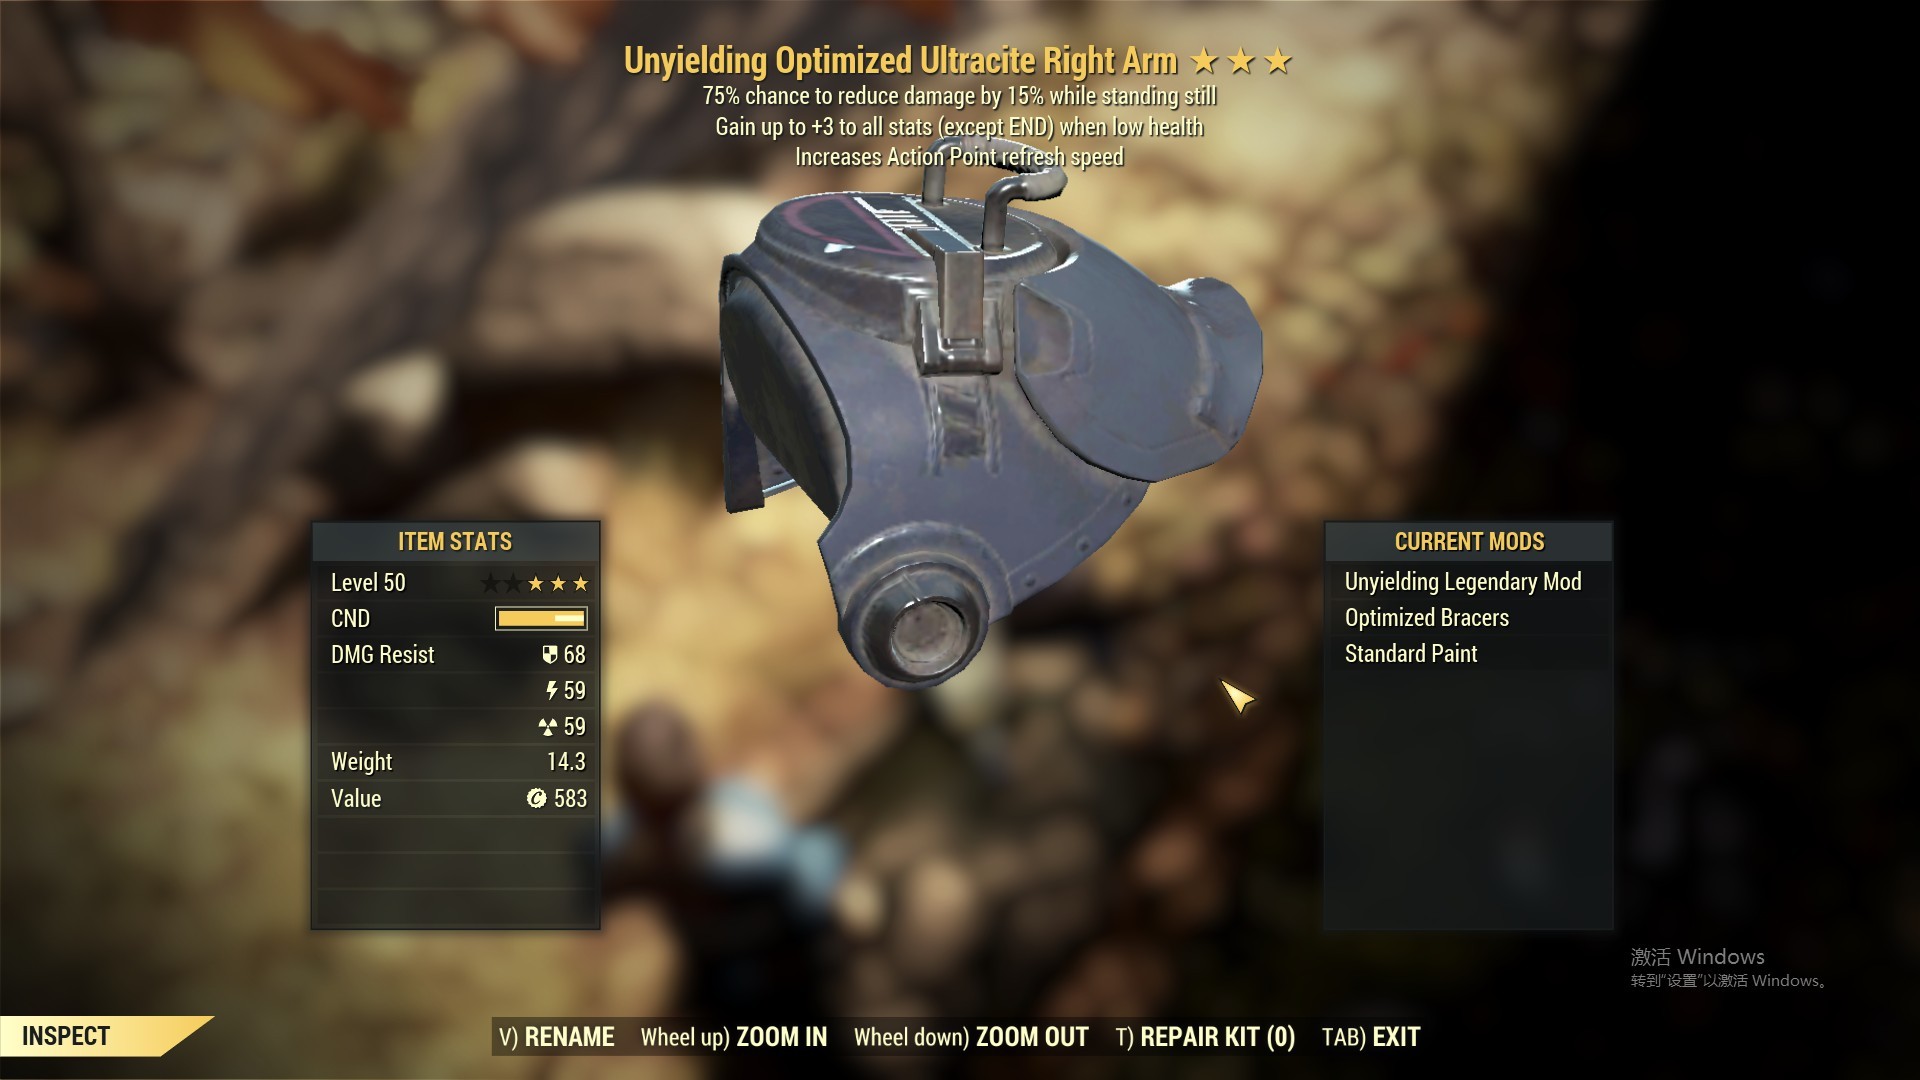 Unyielding [Sent AP] Optimized Ultracite Right Arm